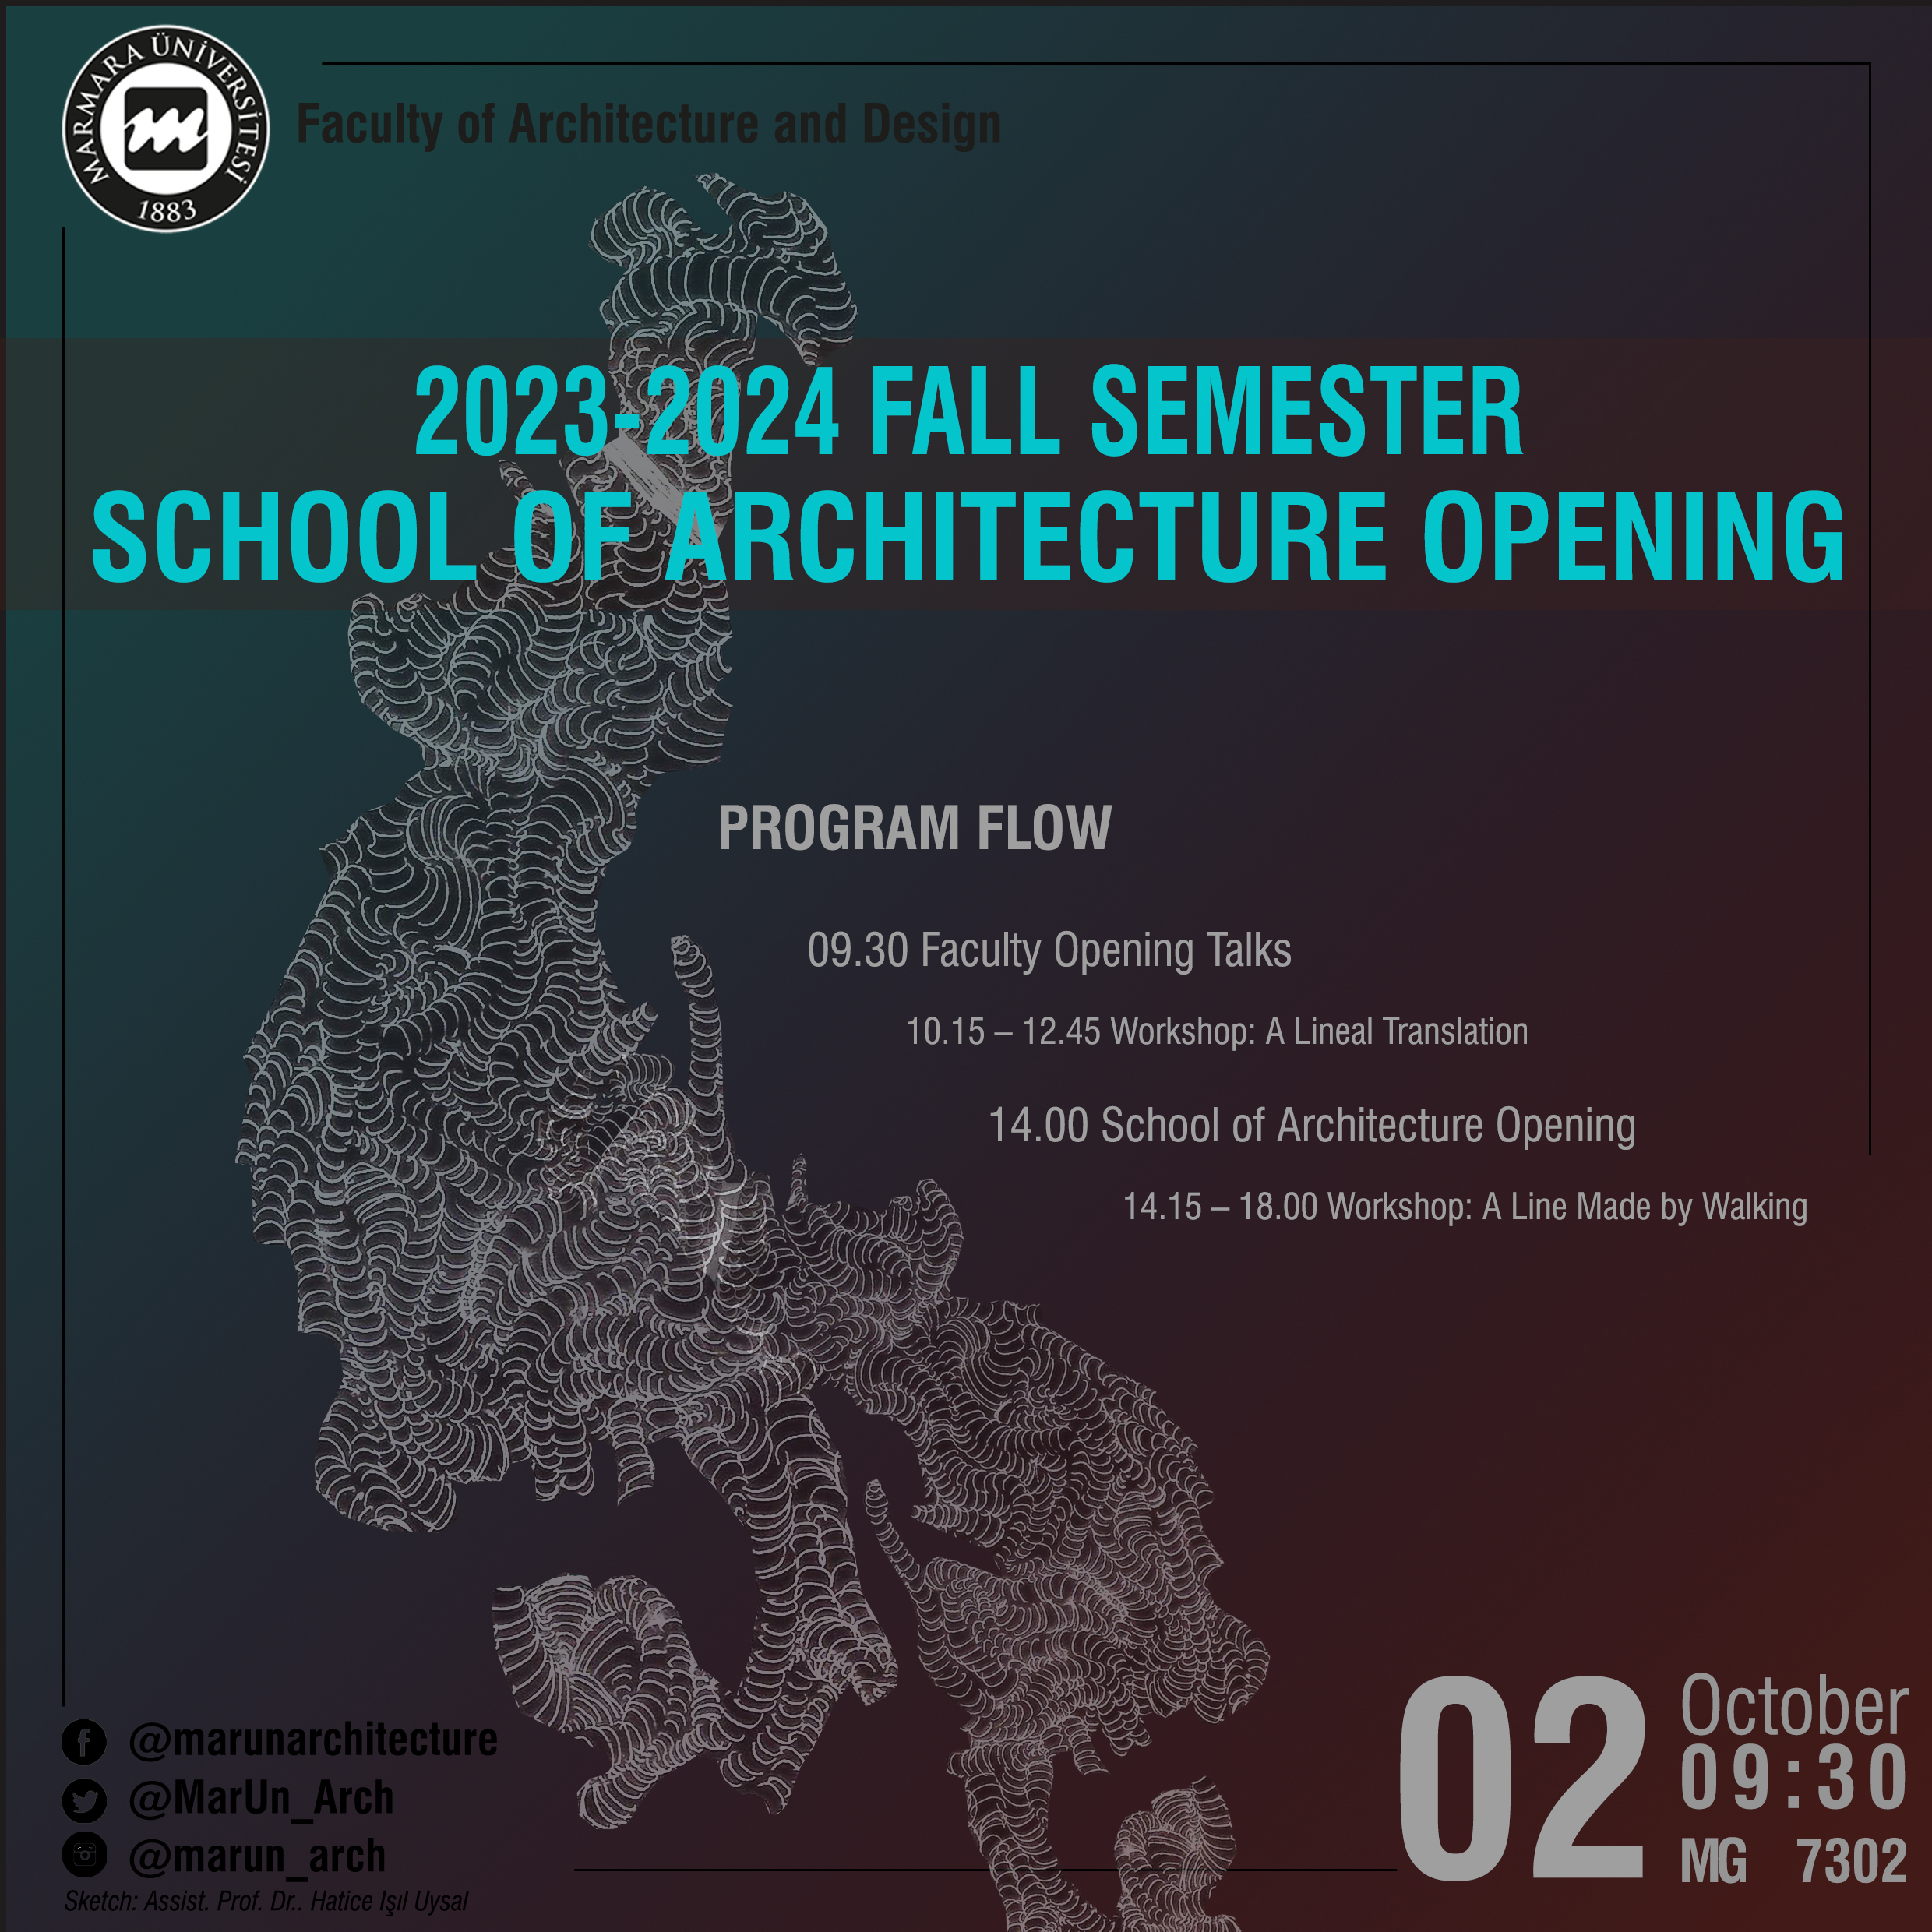 Architecture Opening.jpg (2.31 MB)